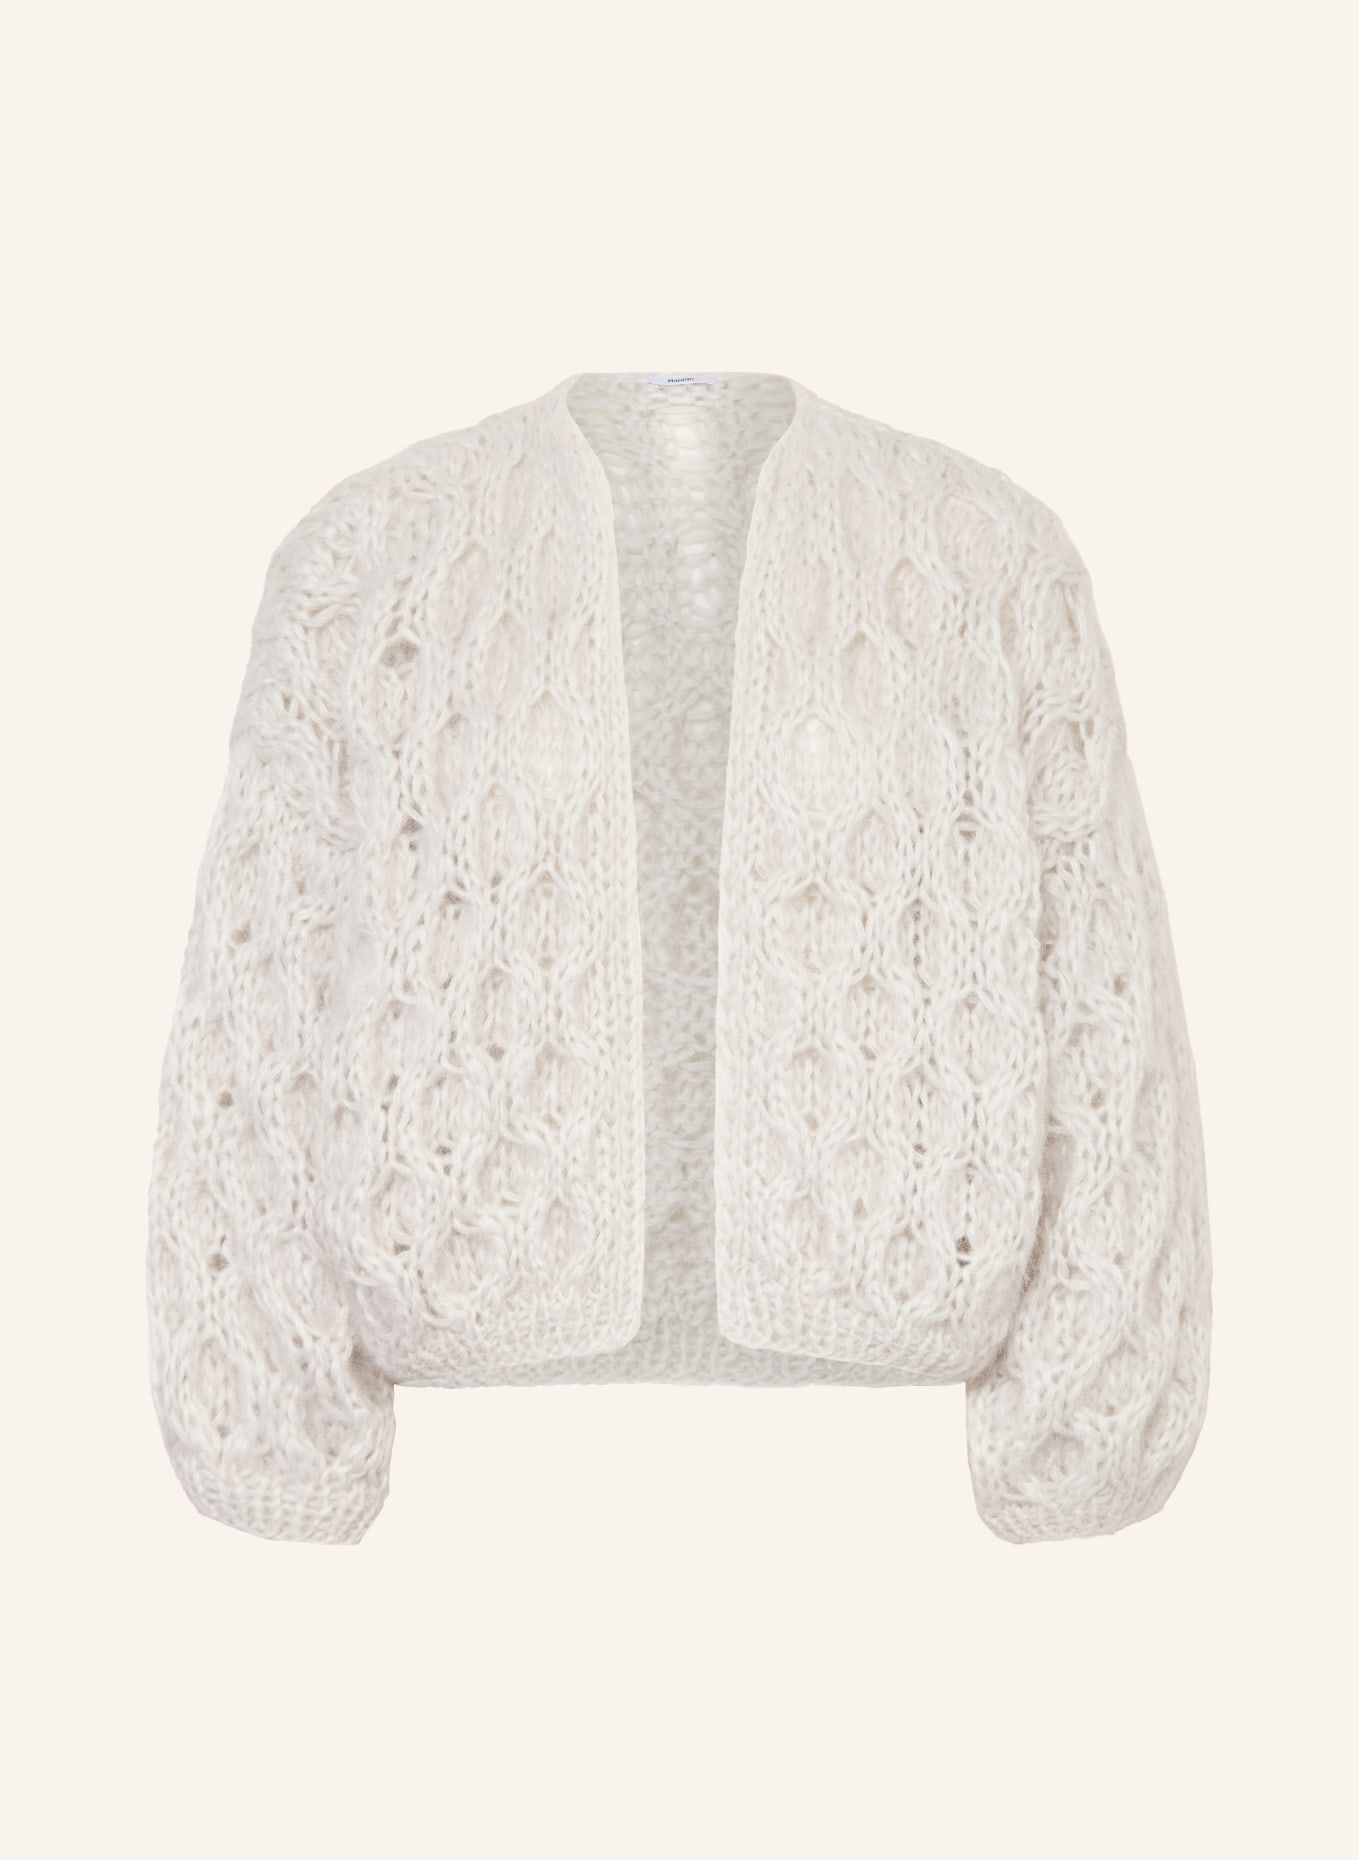 MAIAMI Knit cardigan made of mohair, Color: LIGHT GRAY (Image 1)